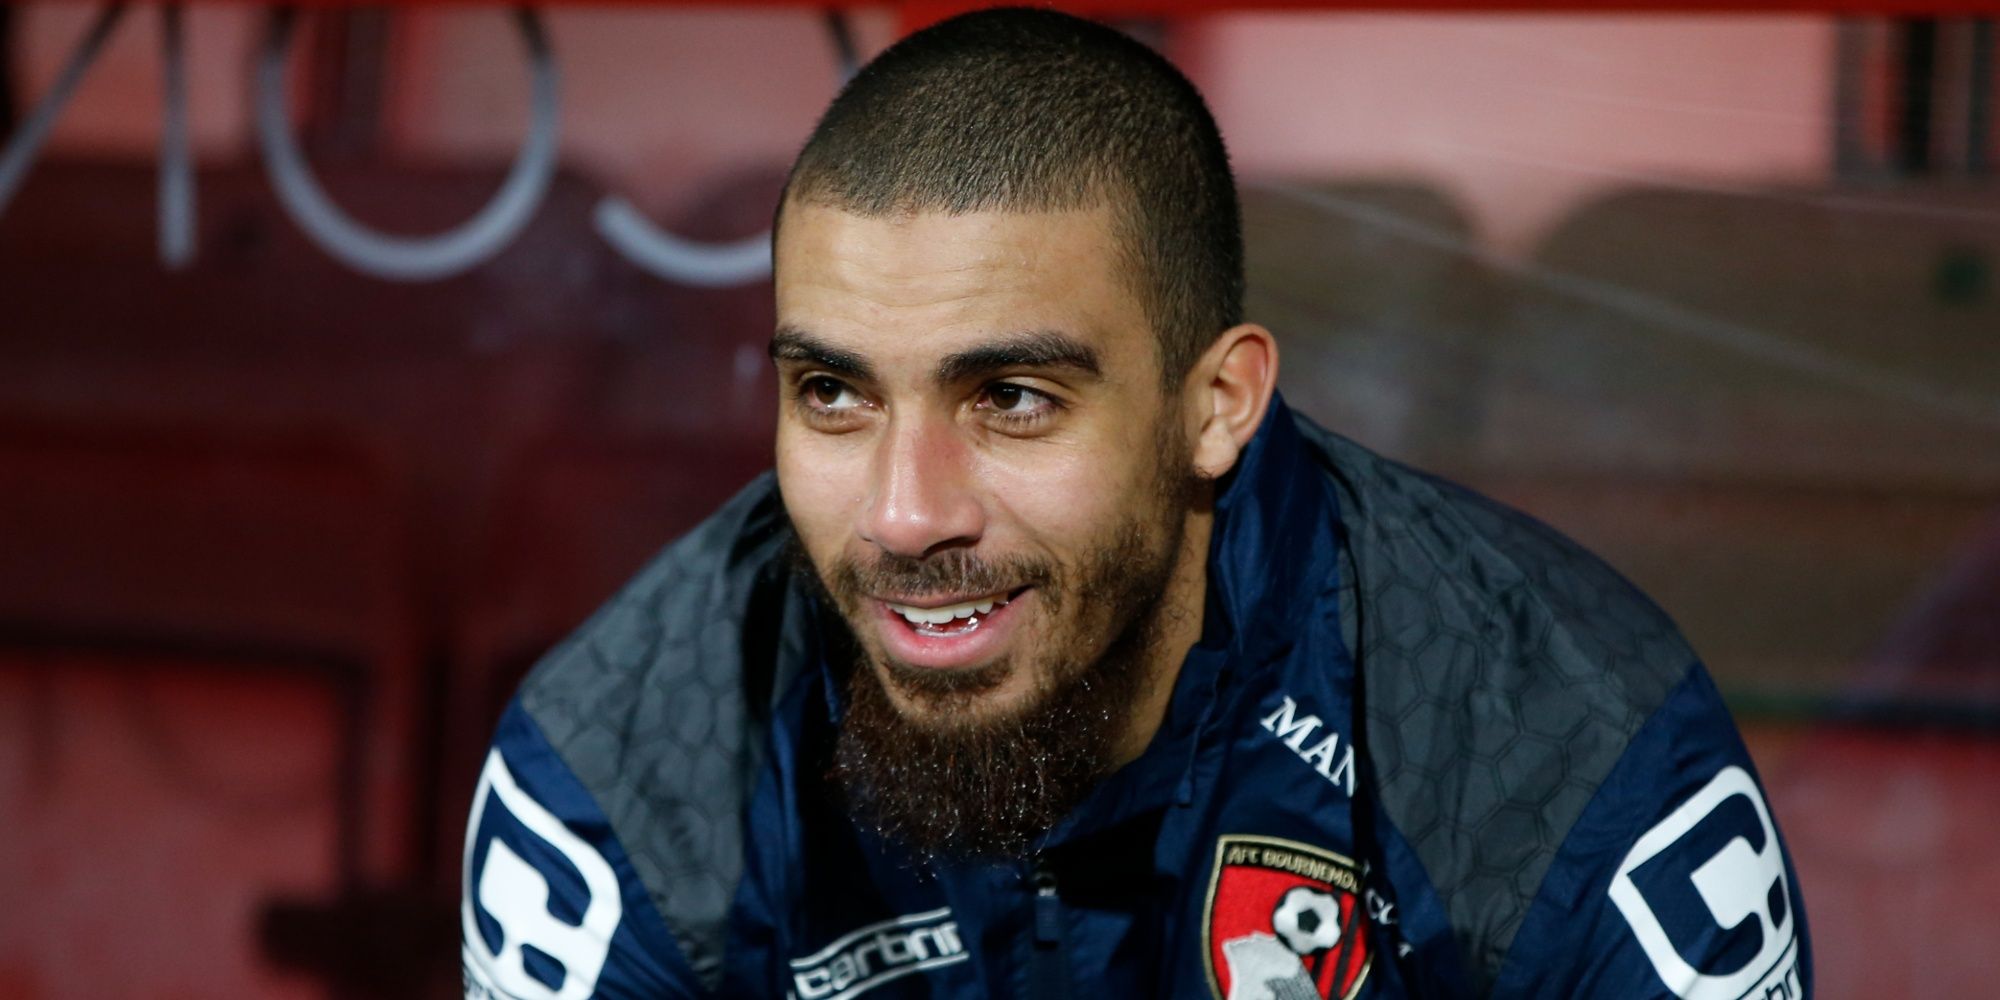 Bournemouth's Lewis Grabban on the bench